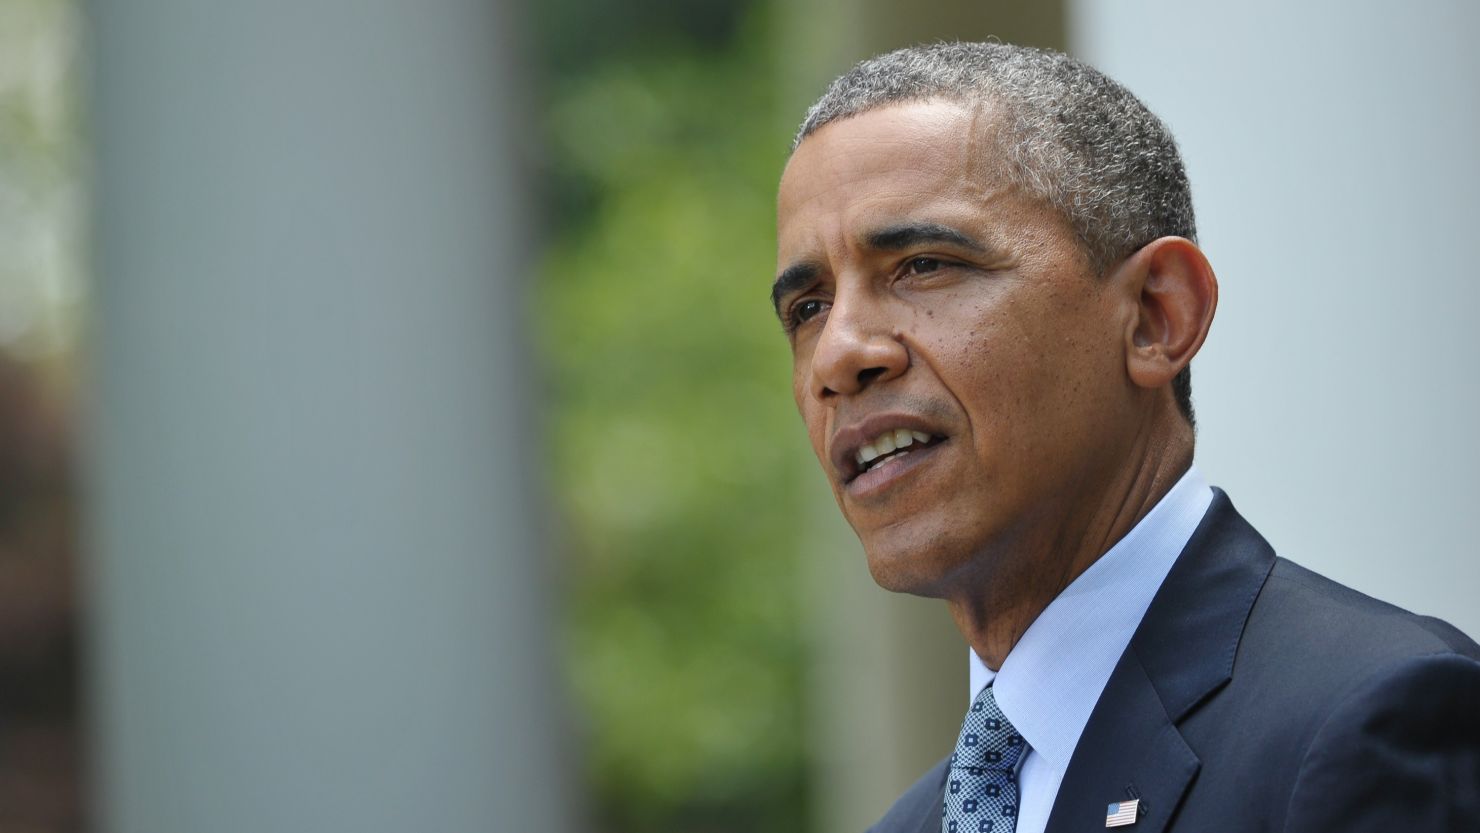 President Barack Obama said Monday he would take executive action on immigration, where Congress has failed to act.